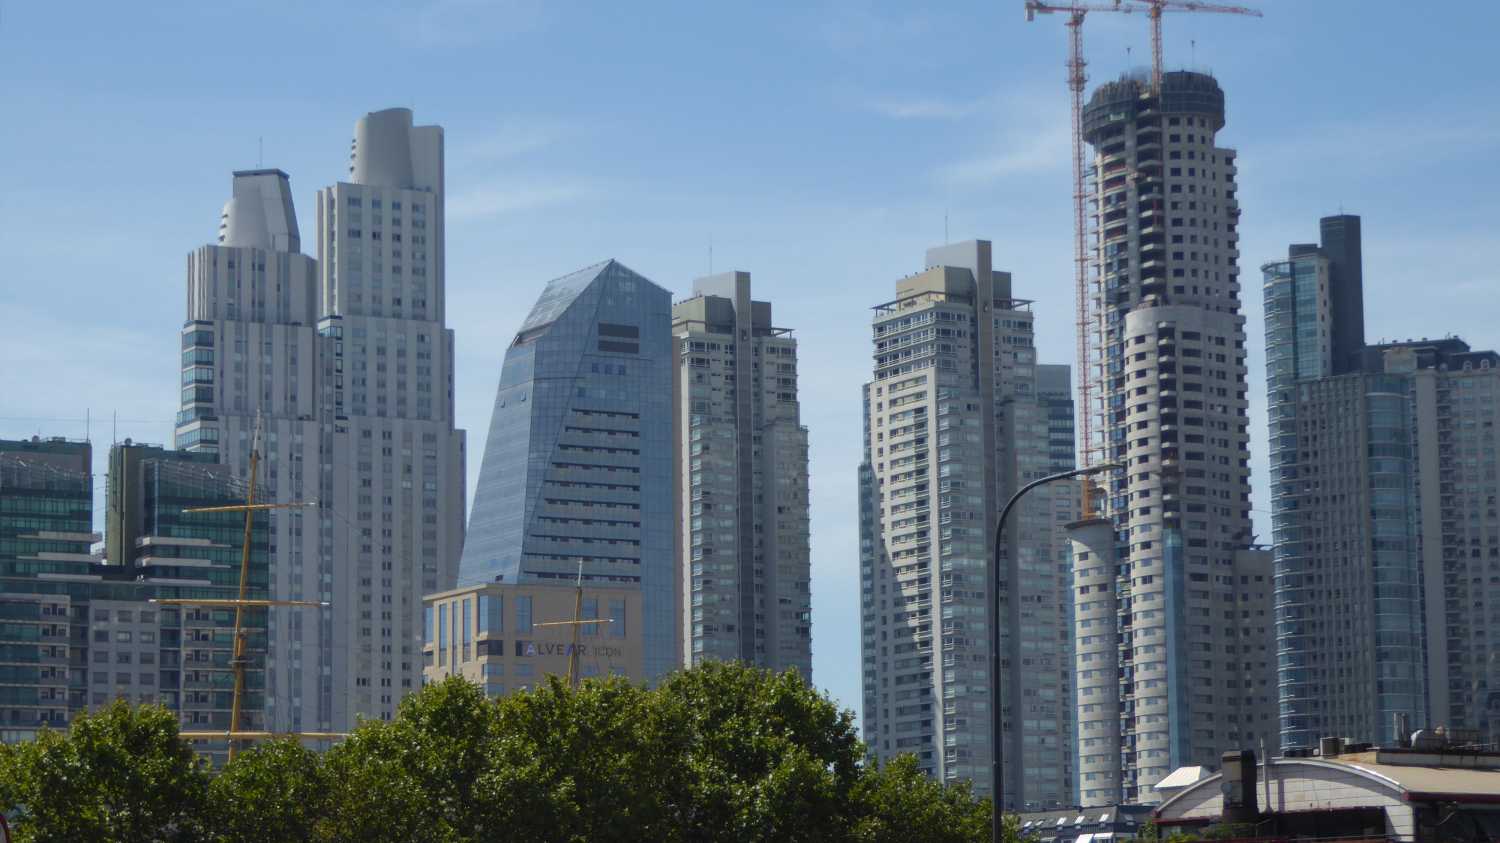 Skyscapers in Buenos Aires